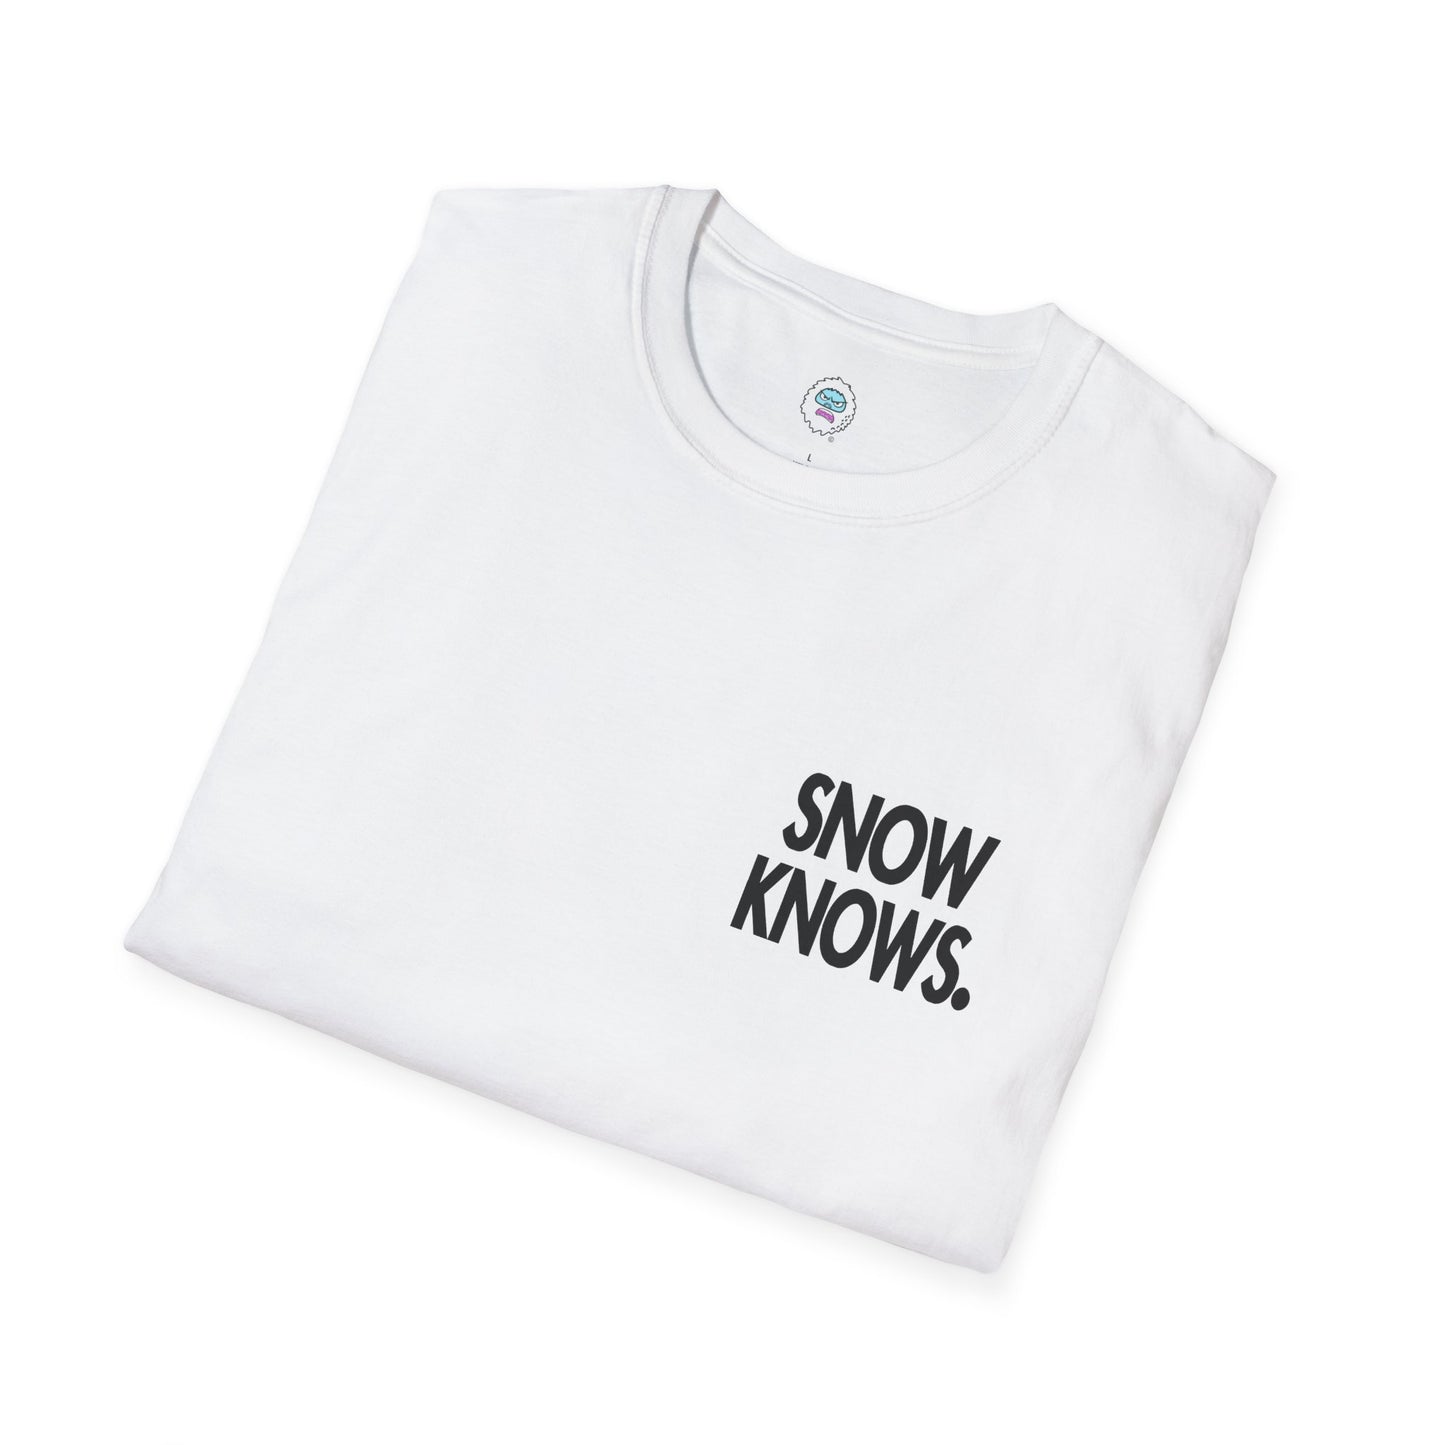 Snow Knows T-Shirt